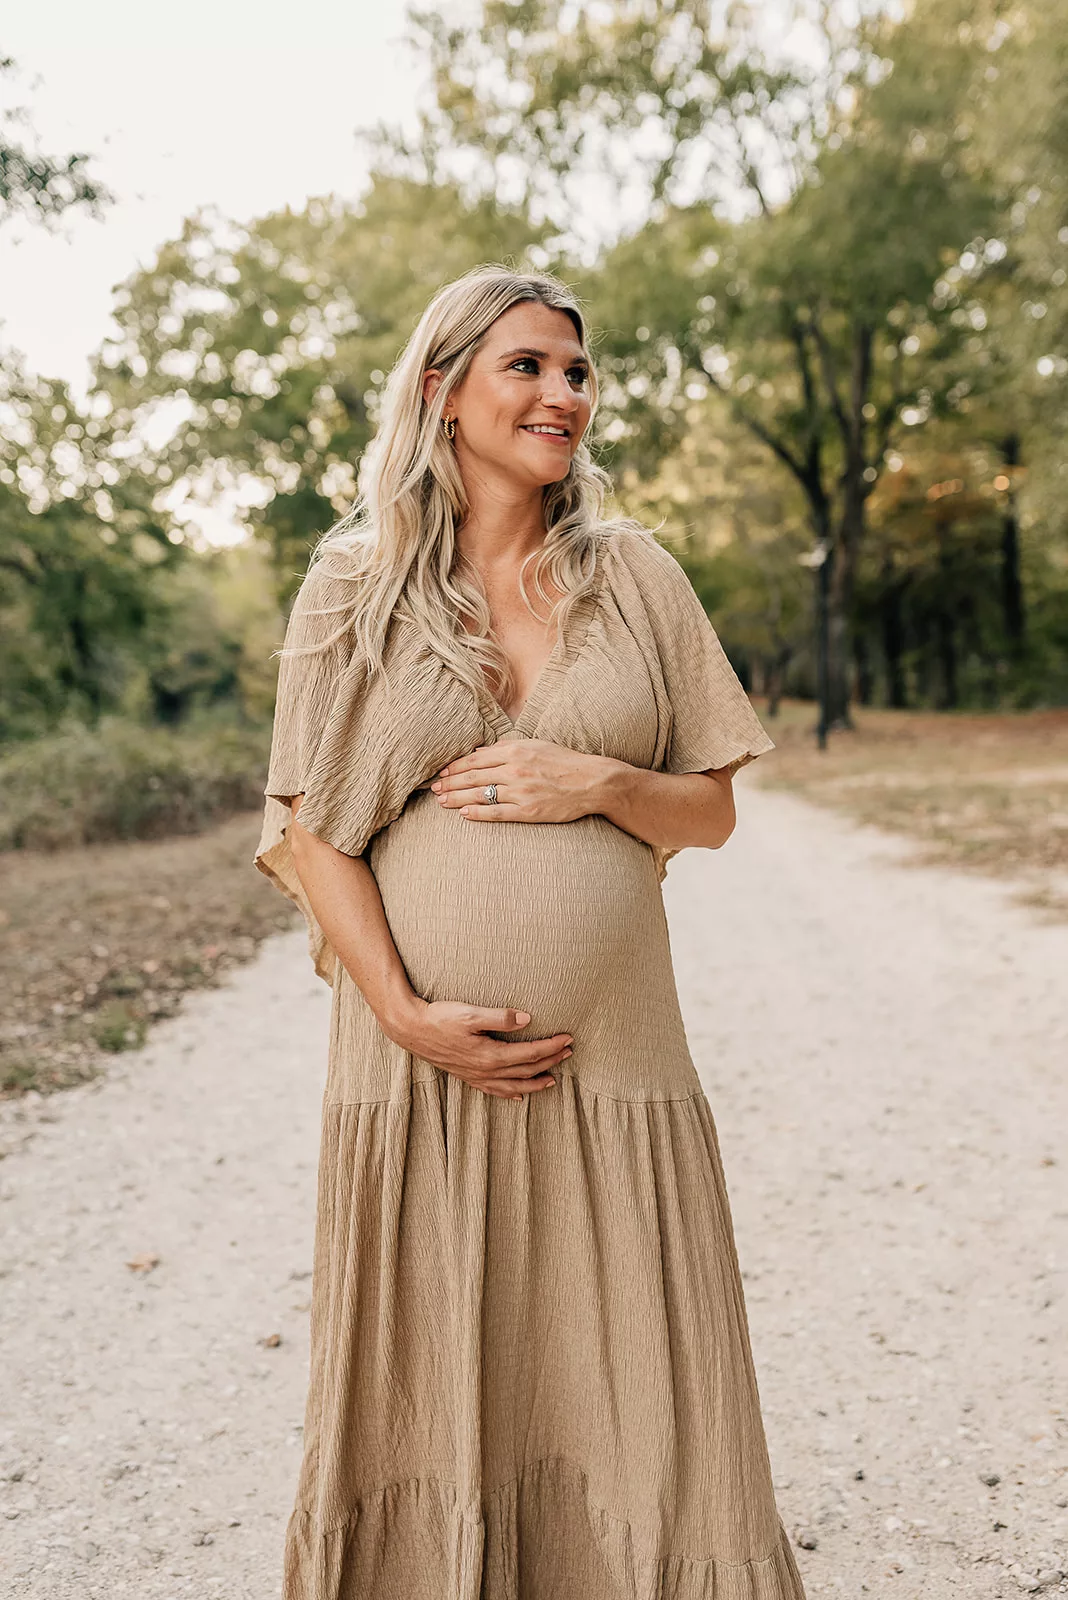 A mom to be stands in a park path holding her bump and smiling over her shoulder thanks to Houston Fertility Clinics